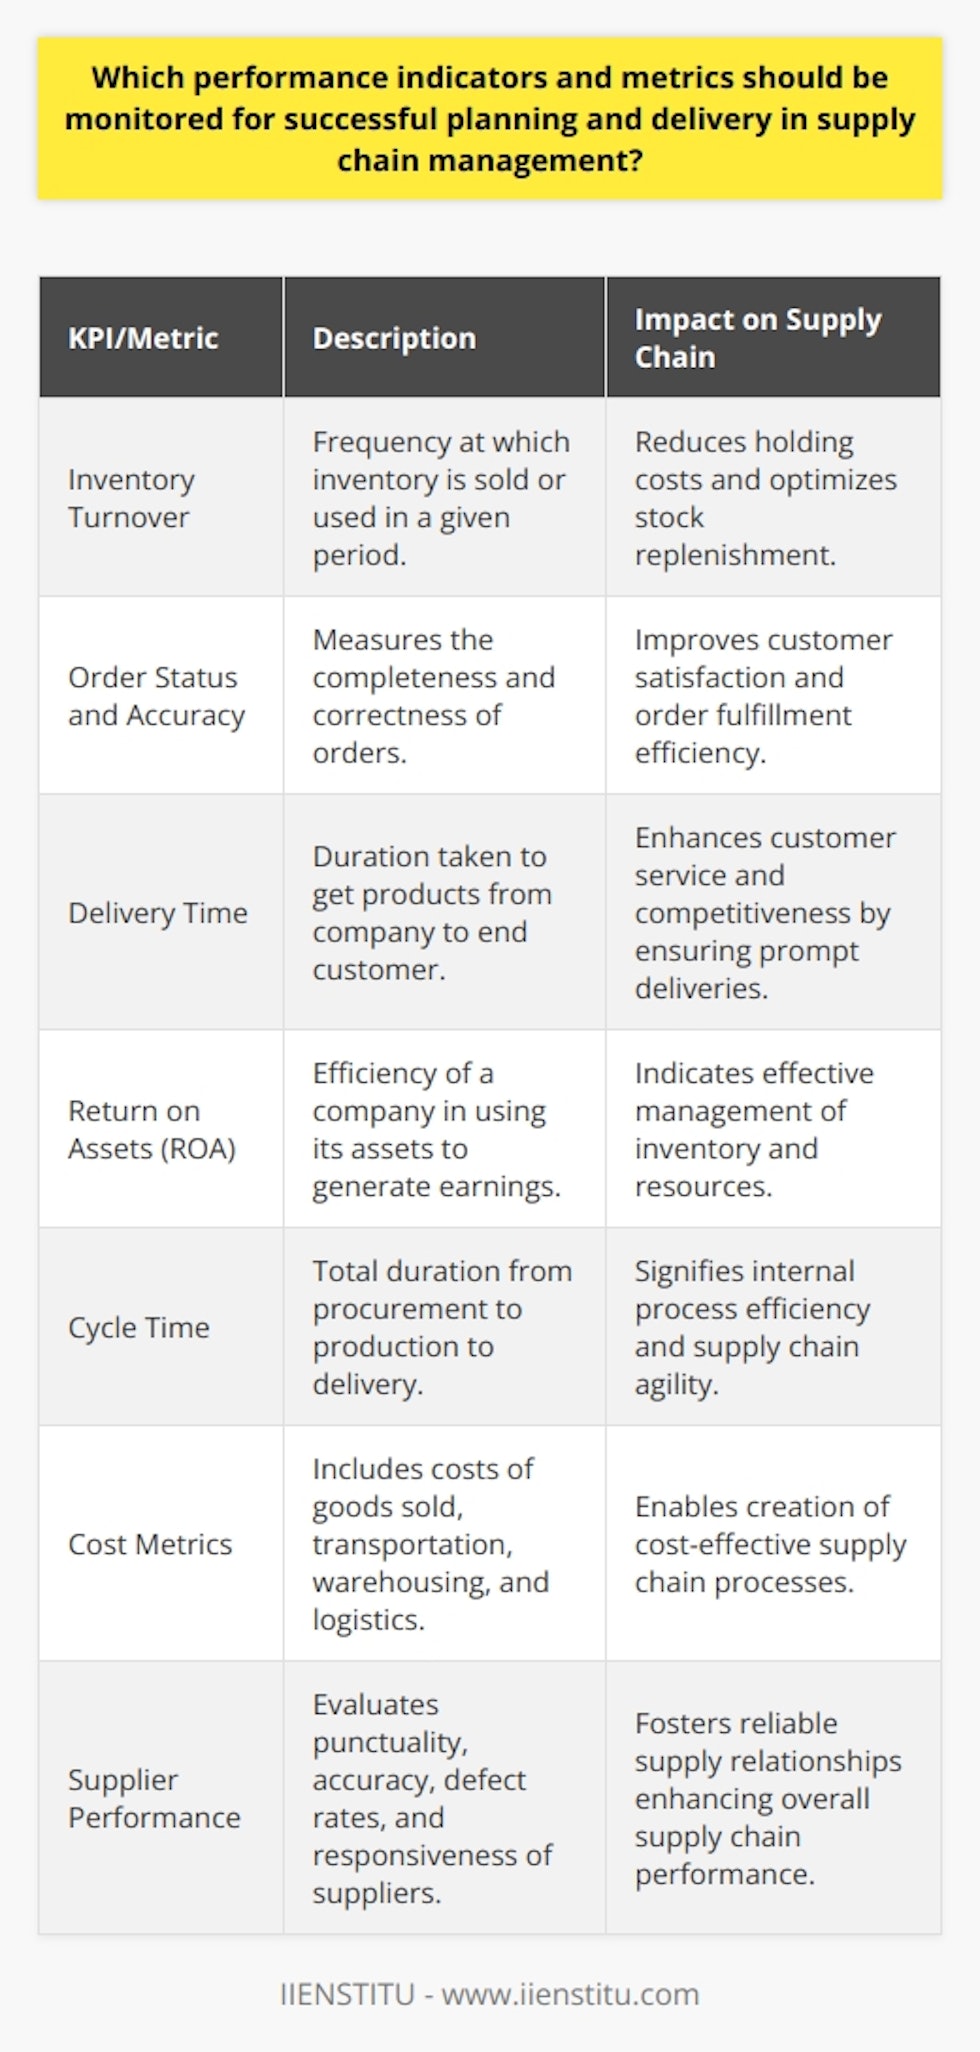 In the complex environment of supply chain management, identifying and monitoring specific performance indicators and metrics is instrumental in ensuring that operations run smoothly and that strategic objectives are met. Here are some essential performance indicators and metrics that should be considered for successful planning and delivery in supply chain management:Inventory Turnover: This KPI reflects the number of times inventory is sold or used over a specific time frame. Effective management of inventory turnover ensures that stock is not sitting idle, thereby reducing holding costs and increasing the efficiency of stock replenishment.Order Status and Accuracy: Tracking the completeness and correctness of orders is vital for customer satisfaction and operational excellence. Monitoring these metrics can highlight issues in order fulfillment and inventory management that need to be addressed.Delivery Time: The speed with which products reach the end customer is a critical component of supply chain success. This metric impacts customer satisfaction and can differentiate a business from its competitors. Fast and reliable delivery times can also contribute to a leaner supply chain with less need for large stock cushions.Return on Assets (ROA): This metric indicates how efficiently a company utilizes its assets to generate earnings. In the context of supply chain management, a high ROA could signify effective management of inventory, equipment, and distribution centers.Cycle Time: The total time taken from the beginning to the end of a supply chain process — from procurement to production to delivery — is a key measure of internal process efficiency. Shorter cycle times often correspond to more agile and responsive supply chains.Cost Metrics: Understanding and controlling costs across the supply chain is vital. Metrics may include the cost of goods sold, transportation, warehousing, and overall logistics costs. Monitoring these figures helps in creating a cost-effective supply chain without sacrificing quality or efficiency.Supplier Performance: Dependable suppliers are foundational to supply chain success. Metrics for supplier performance might encompass their punctuality, accuracy, defect rates, and responsiveness to demand changes. Building solid relationships with high-performing suppliers can lead to improvements in the entire supply chain.These performance indicators and metrics are far from exhaustive but serve as a crucial starting point for businesses seeking to solidify their supply chain operations. With a focus on continual improvement guided by these metrics, companies can predict and preempt issues, adapt to changes in demand and supply conditions, and ultimately secure a competitive advantage in their respective markets.It's important to note that while these KPIs are universally applicable, the specific targets and performance standards for these metrics may vary from one organization to another, based on their individual business objectives, sector-specific challenges, and operating environments. Moreover, leveraging technology for real-time data gathering and analysis can significantly enhance the monitoring process, allowing for proactive and informed decision-making. IIENSTITU, an educational brand, may offer courses and resources that can further guide supply chain professionals in understanding and applying these KPIs effectively.